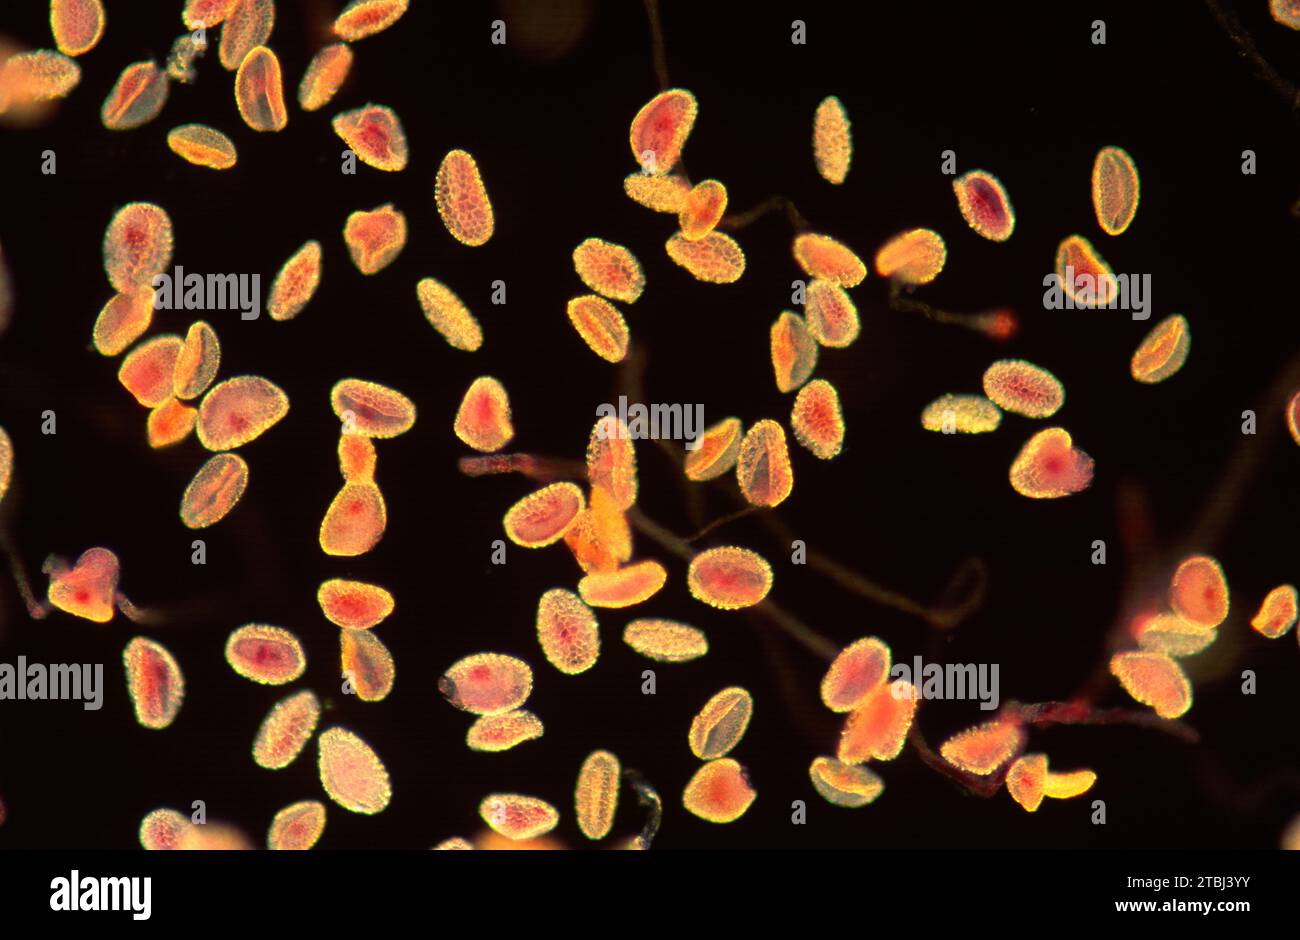 Pollen grains with pollen tube. Optical microscope, dark background. Magnification X100. Stock Photo